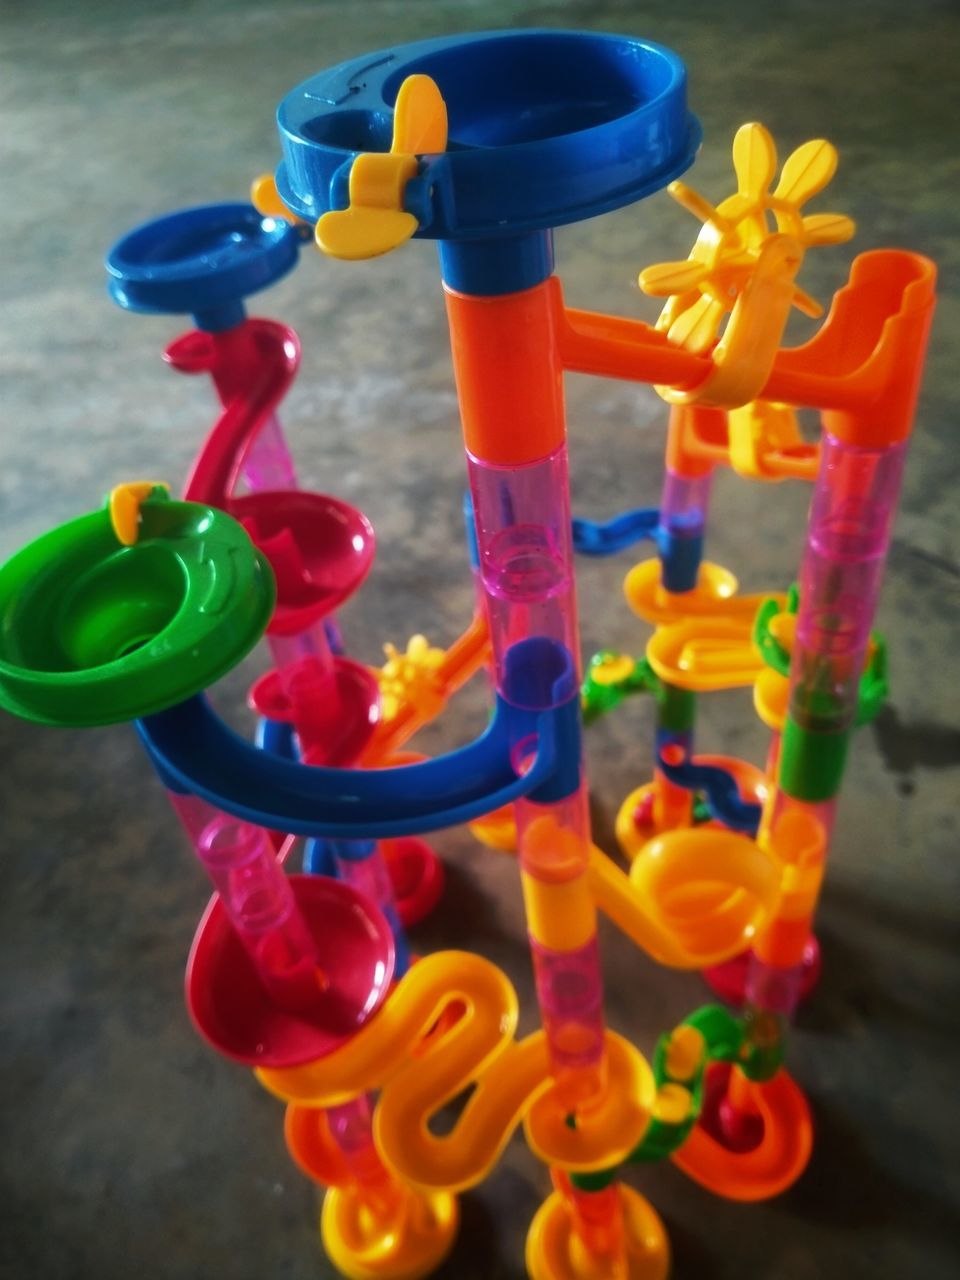 HIGH ANGLE VIEW OF MULTI COLORED TOY ON TABLE